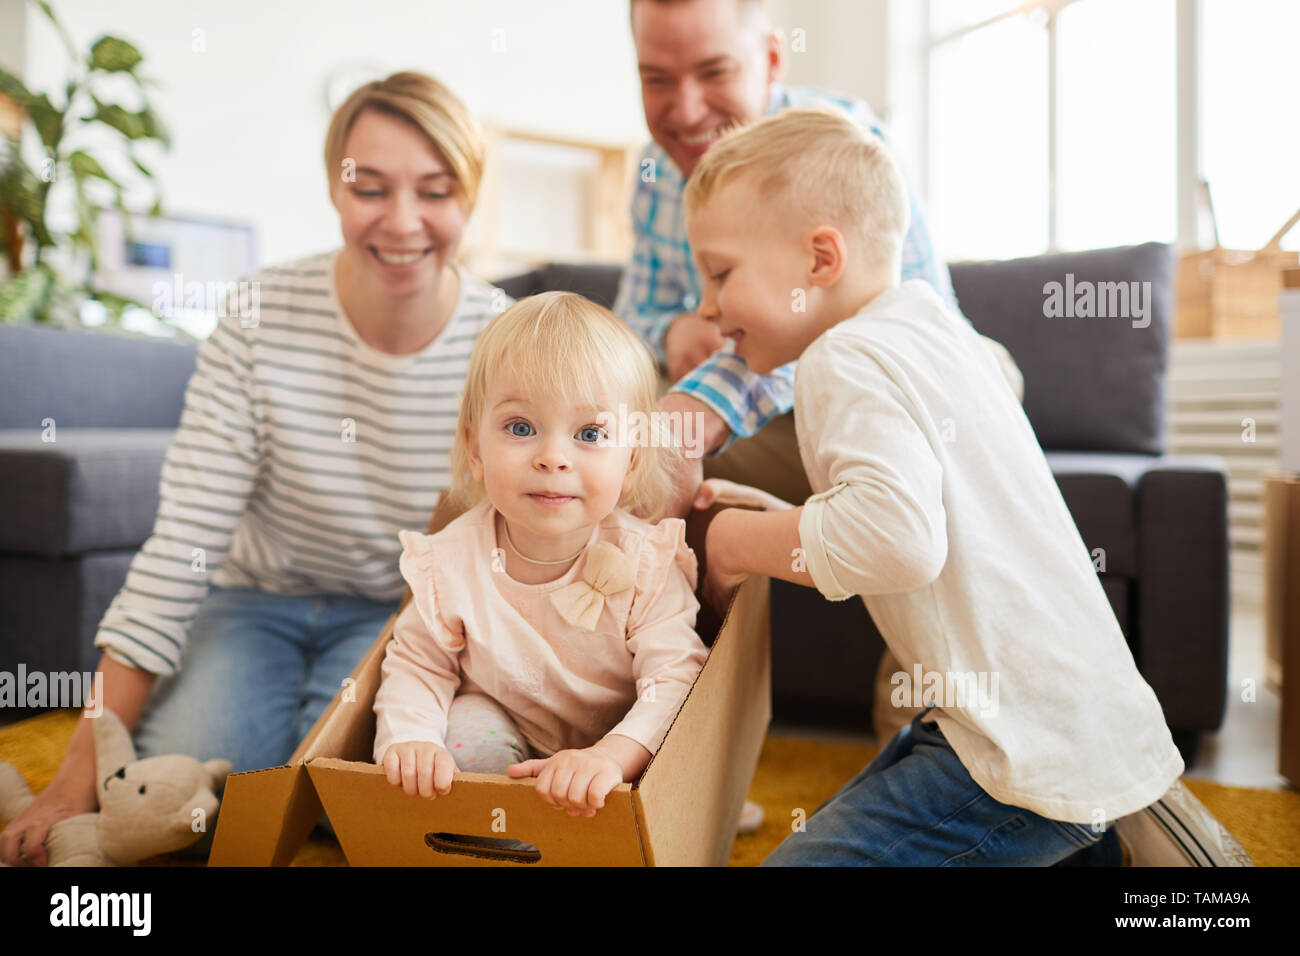 Positive playful young family with two children having fun in new flat: pretty little girl sitting in moving box and looking at camera while other fam Stock Photo